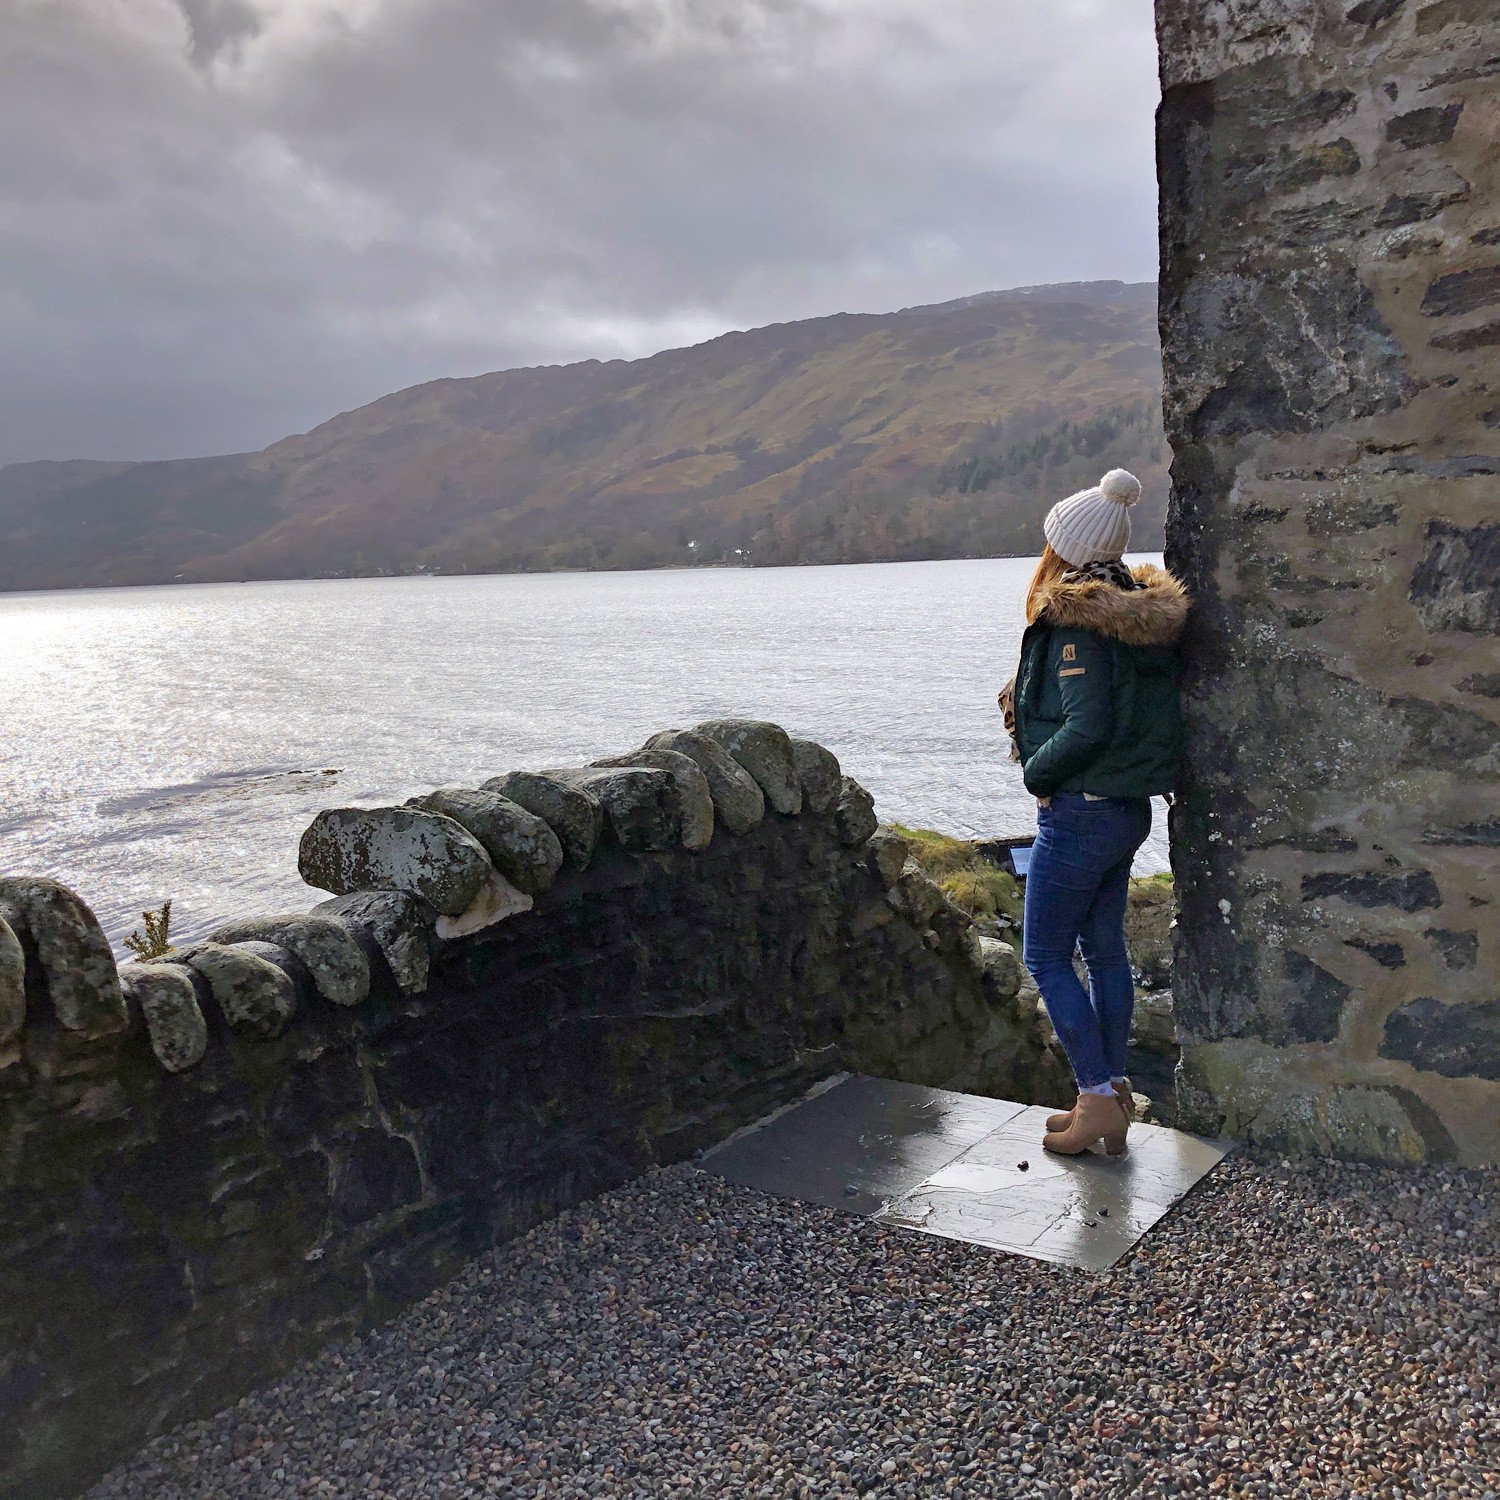 looking out over the loch from Eilean Donan Castle, Scotland